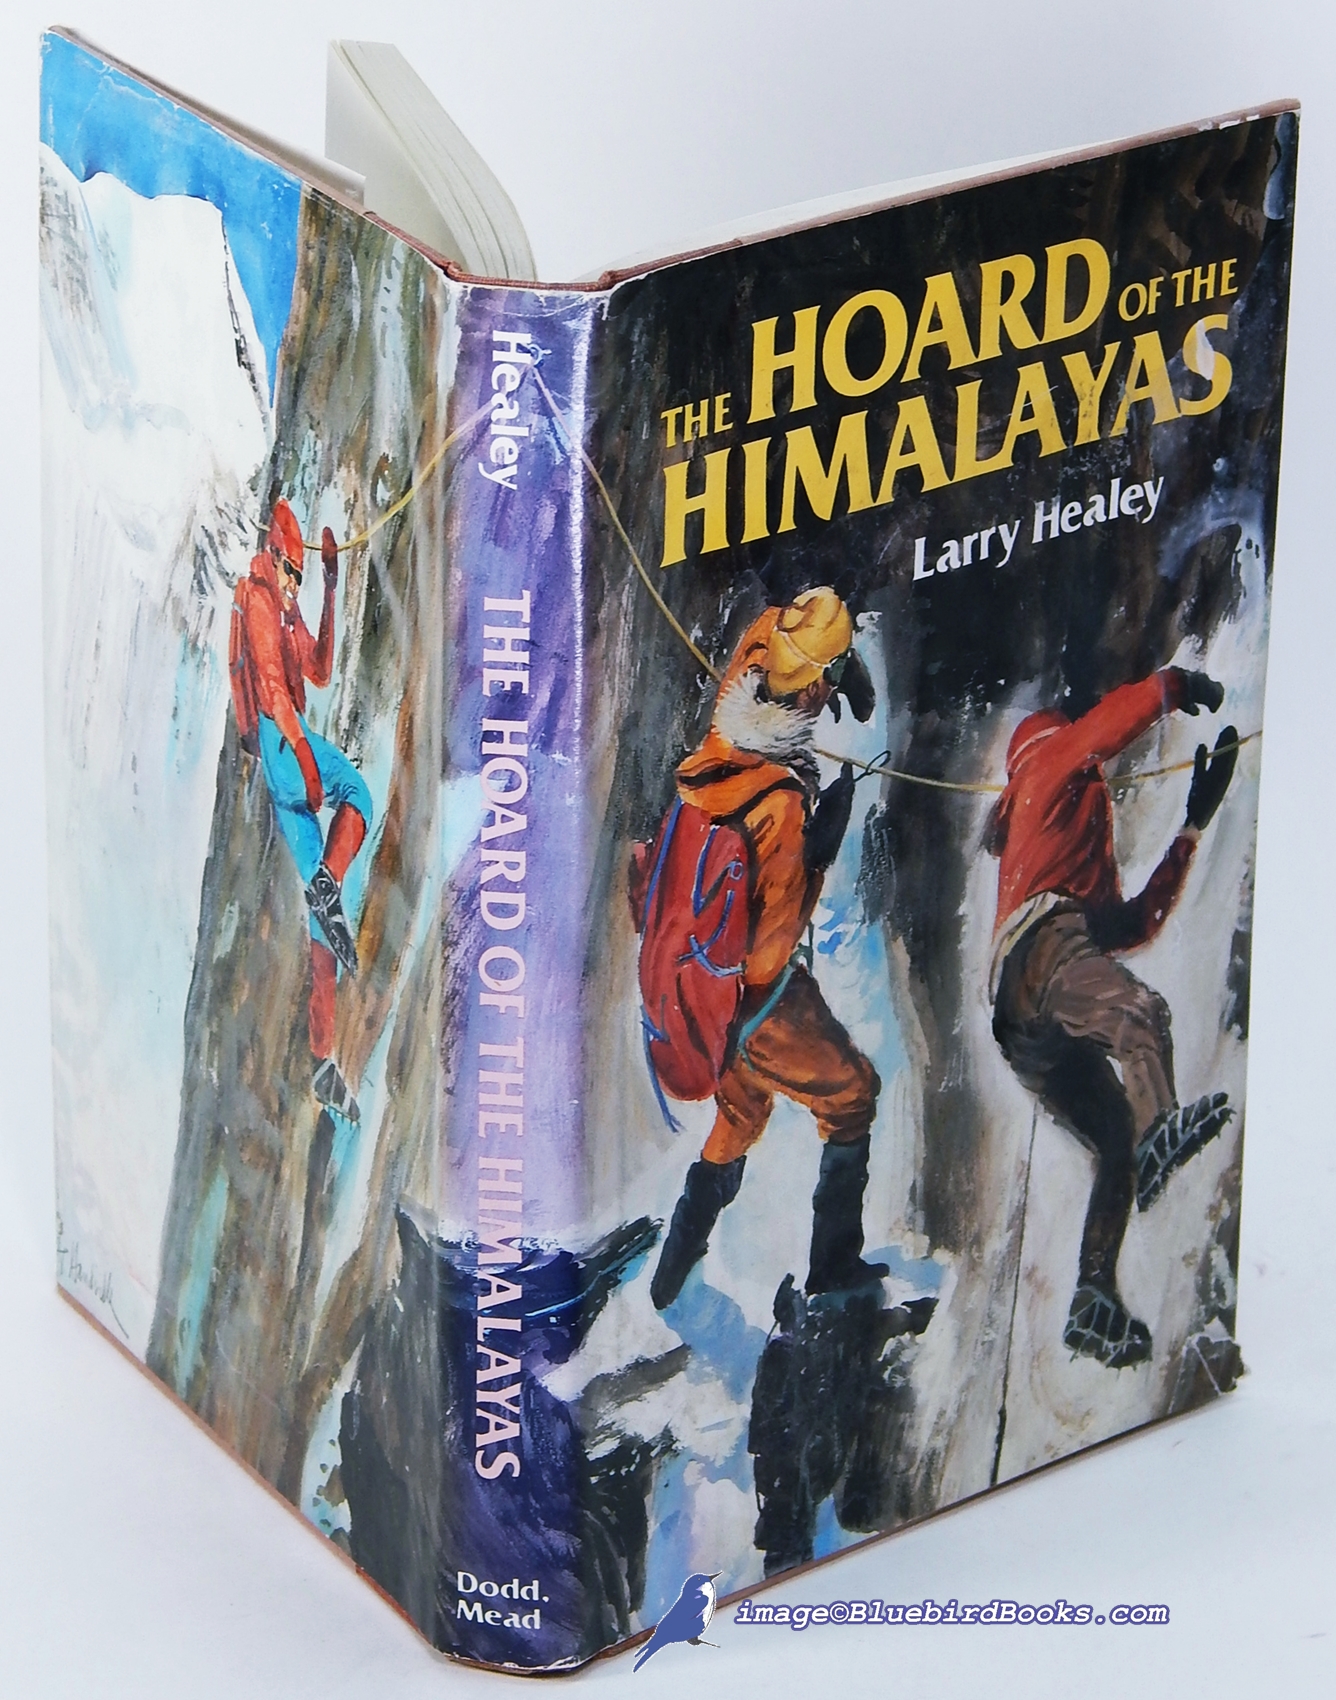 HEALEY, LARRY - The Hoard of the Himalayas